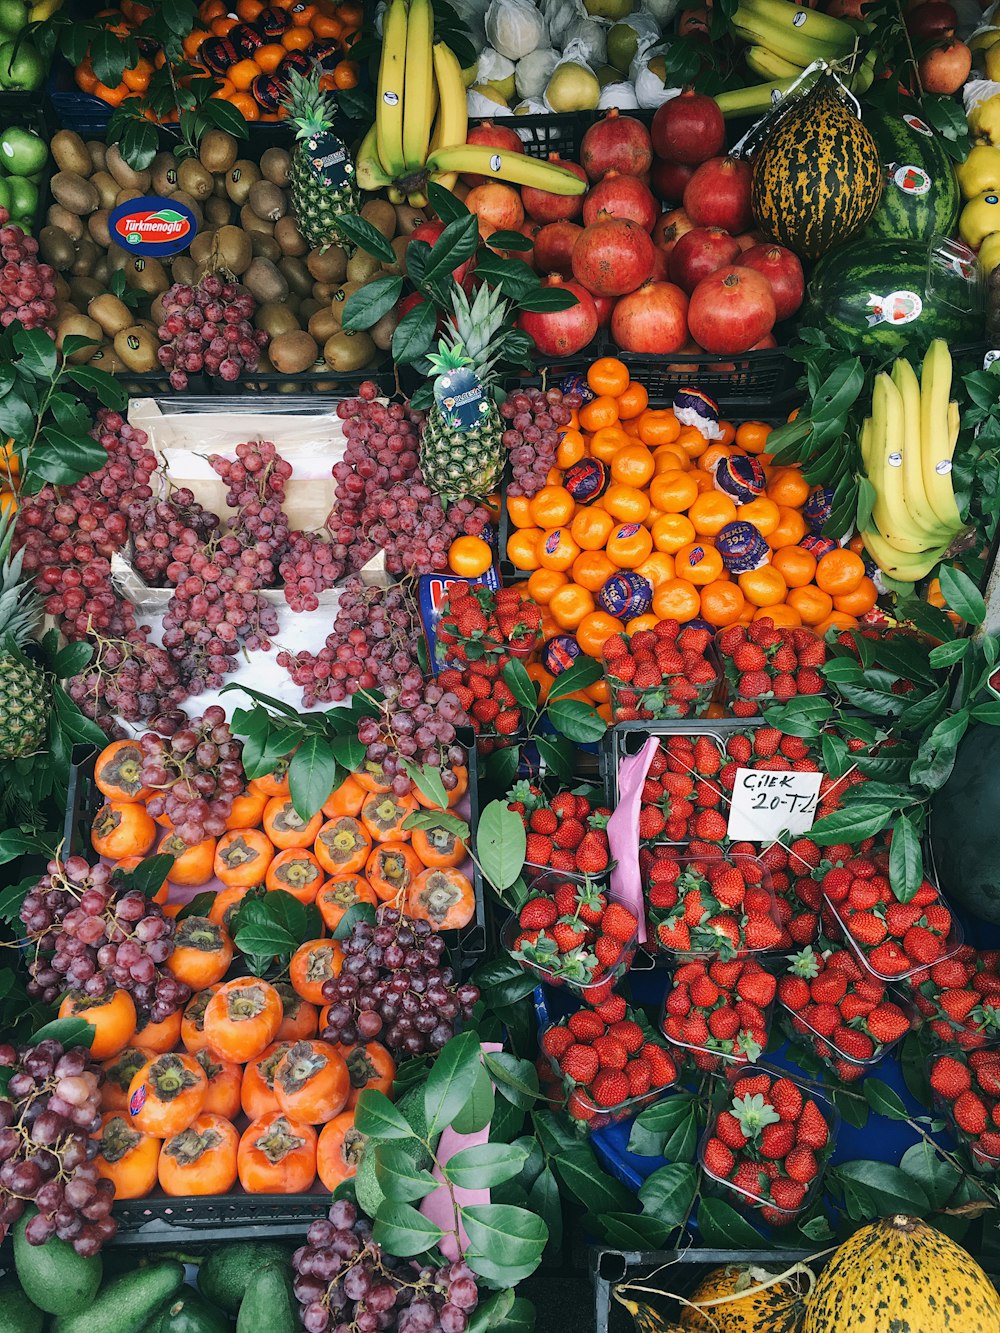 a large display of fruits and vegetables for sale